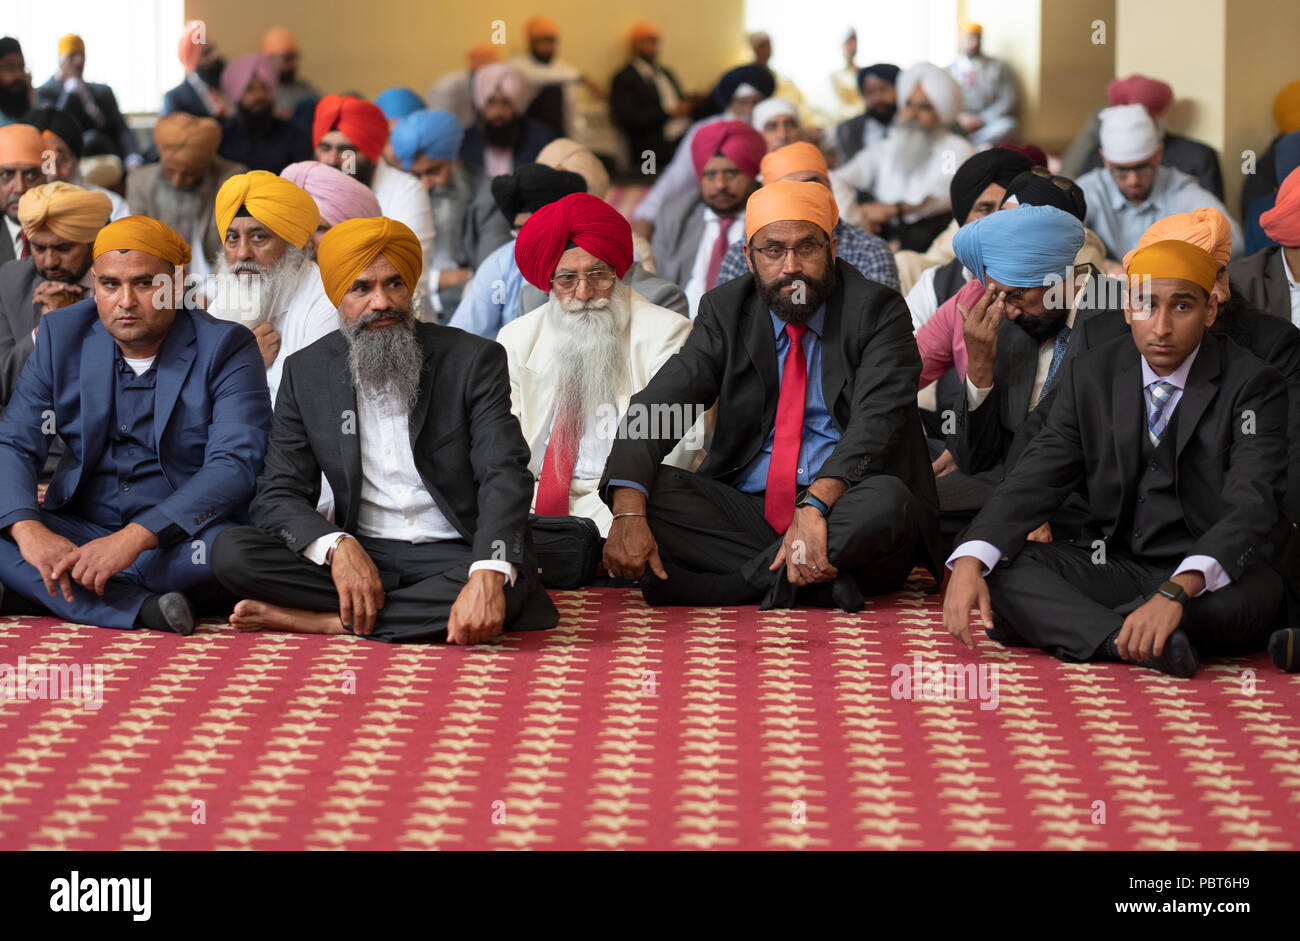 Male guests including the groom's father (white suit) at a Sikh wedding in Richmond Hill, Queens, New York. Stock Photo